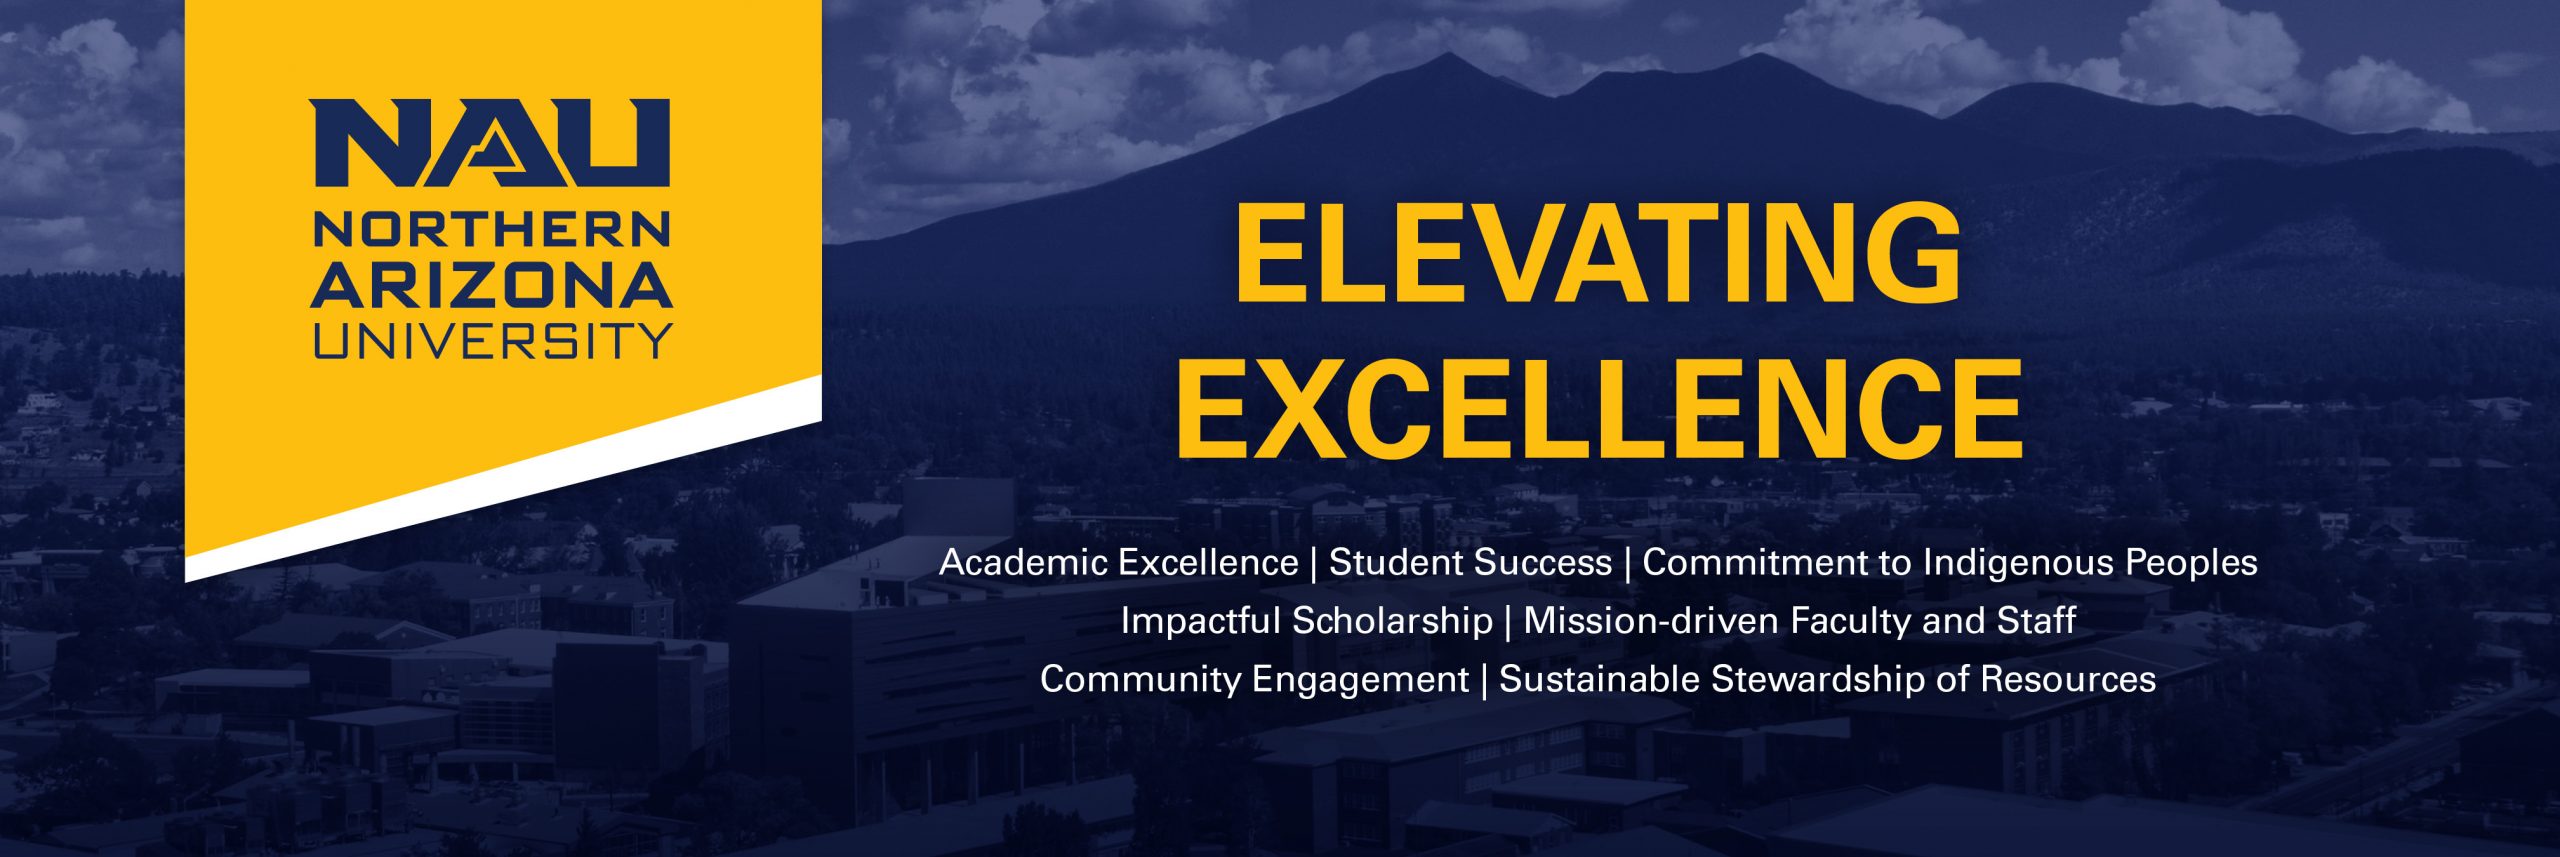 NAU Elevating Excellence Academic Excellence | Student Success | Commitment to Indigenous People | Impactful Scholarship | Mission-driven Faculty and Staff | Community Engagement | Sustainable Stewardship of Resources